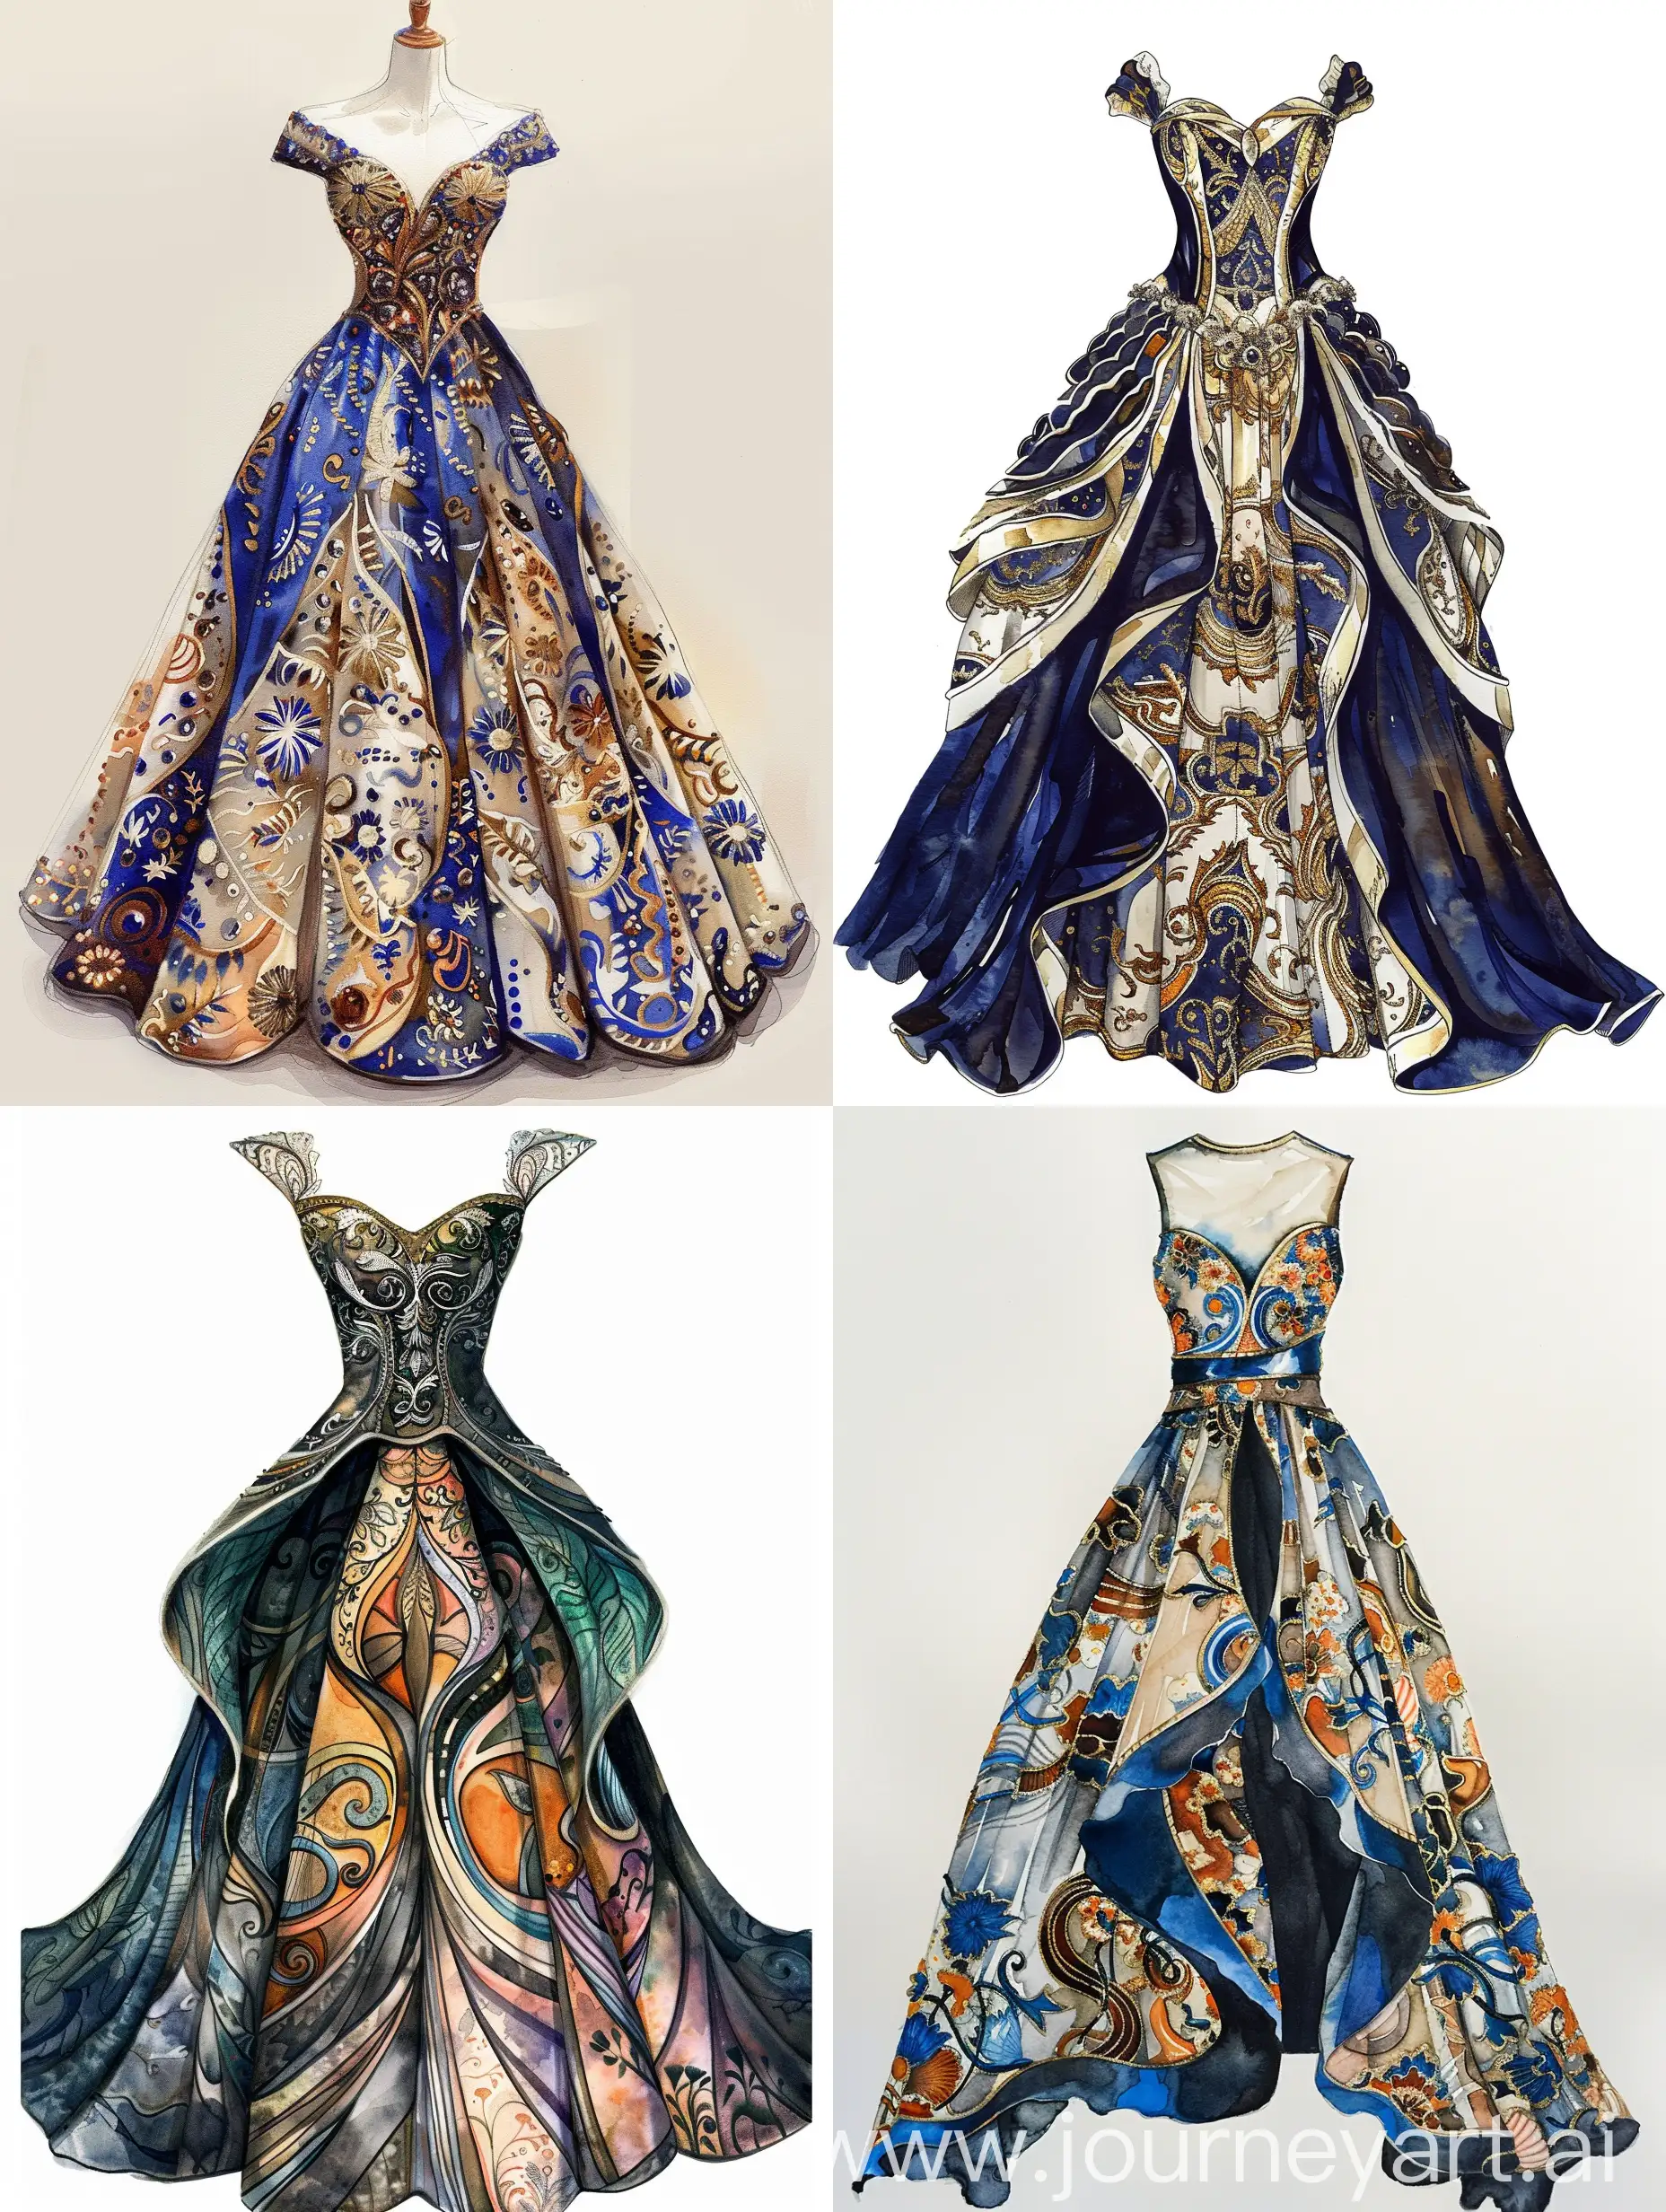 A haute couture dress adorned with intricate murrine glass patterns, merging Baroque and modern fashion illustration styles.